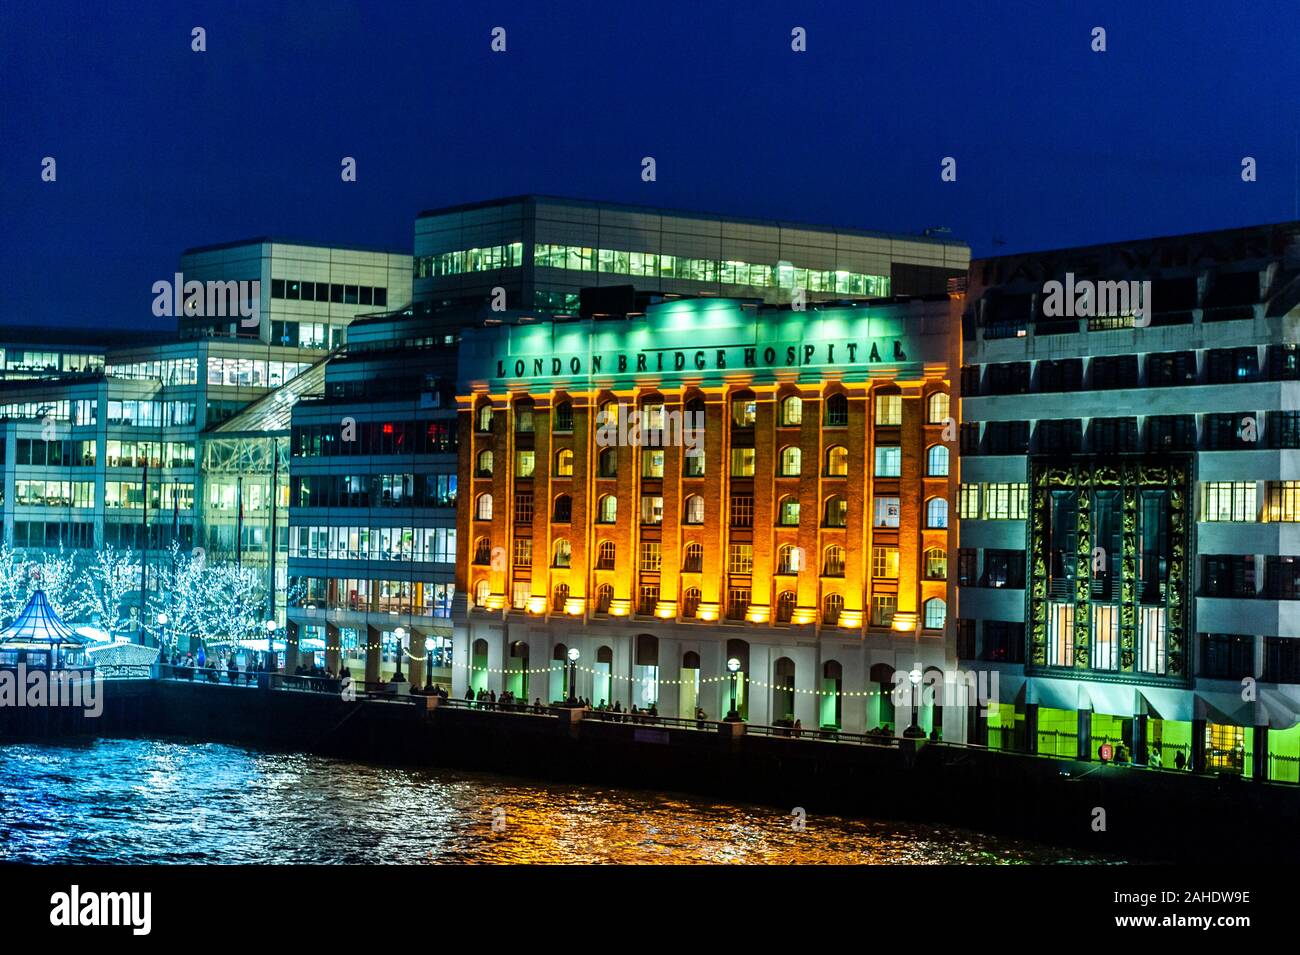 London Bridge Hospital on the banks of the River Thames at dusk in London, UK, with copy space. Stock Photo